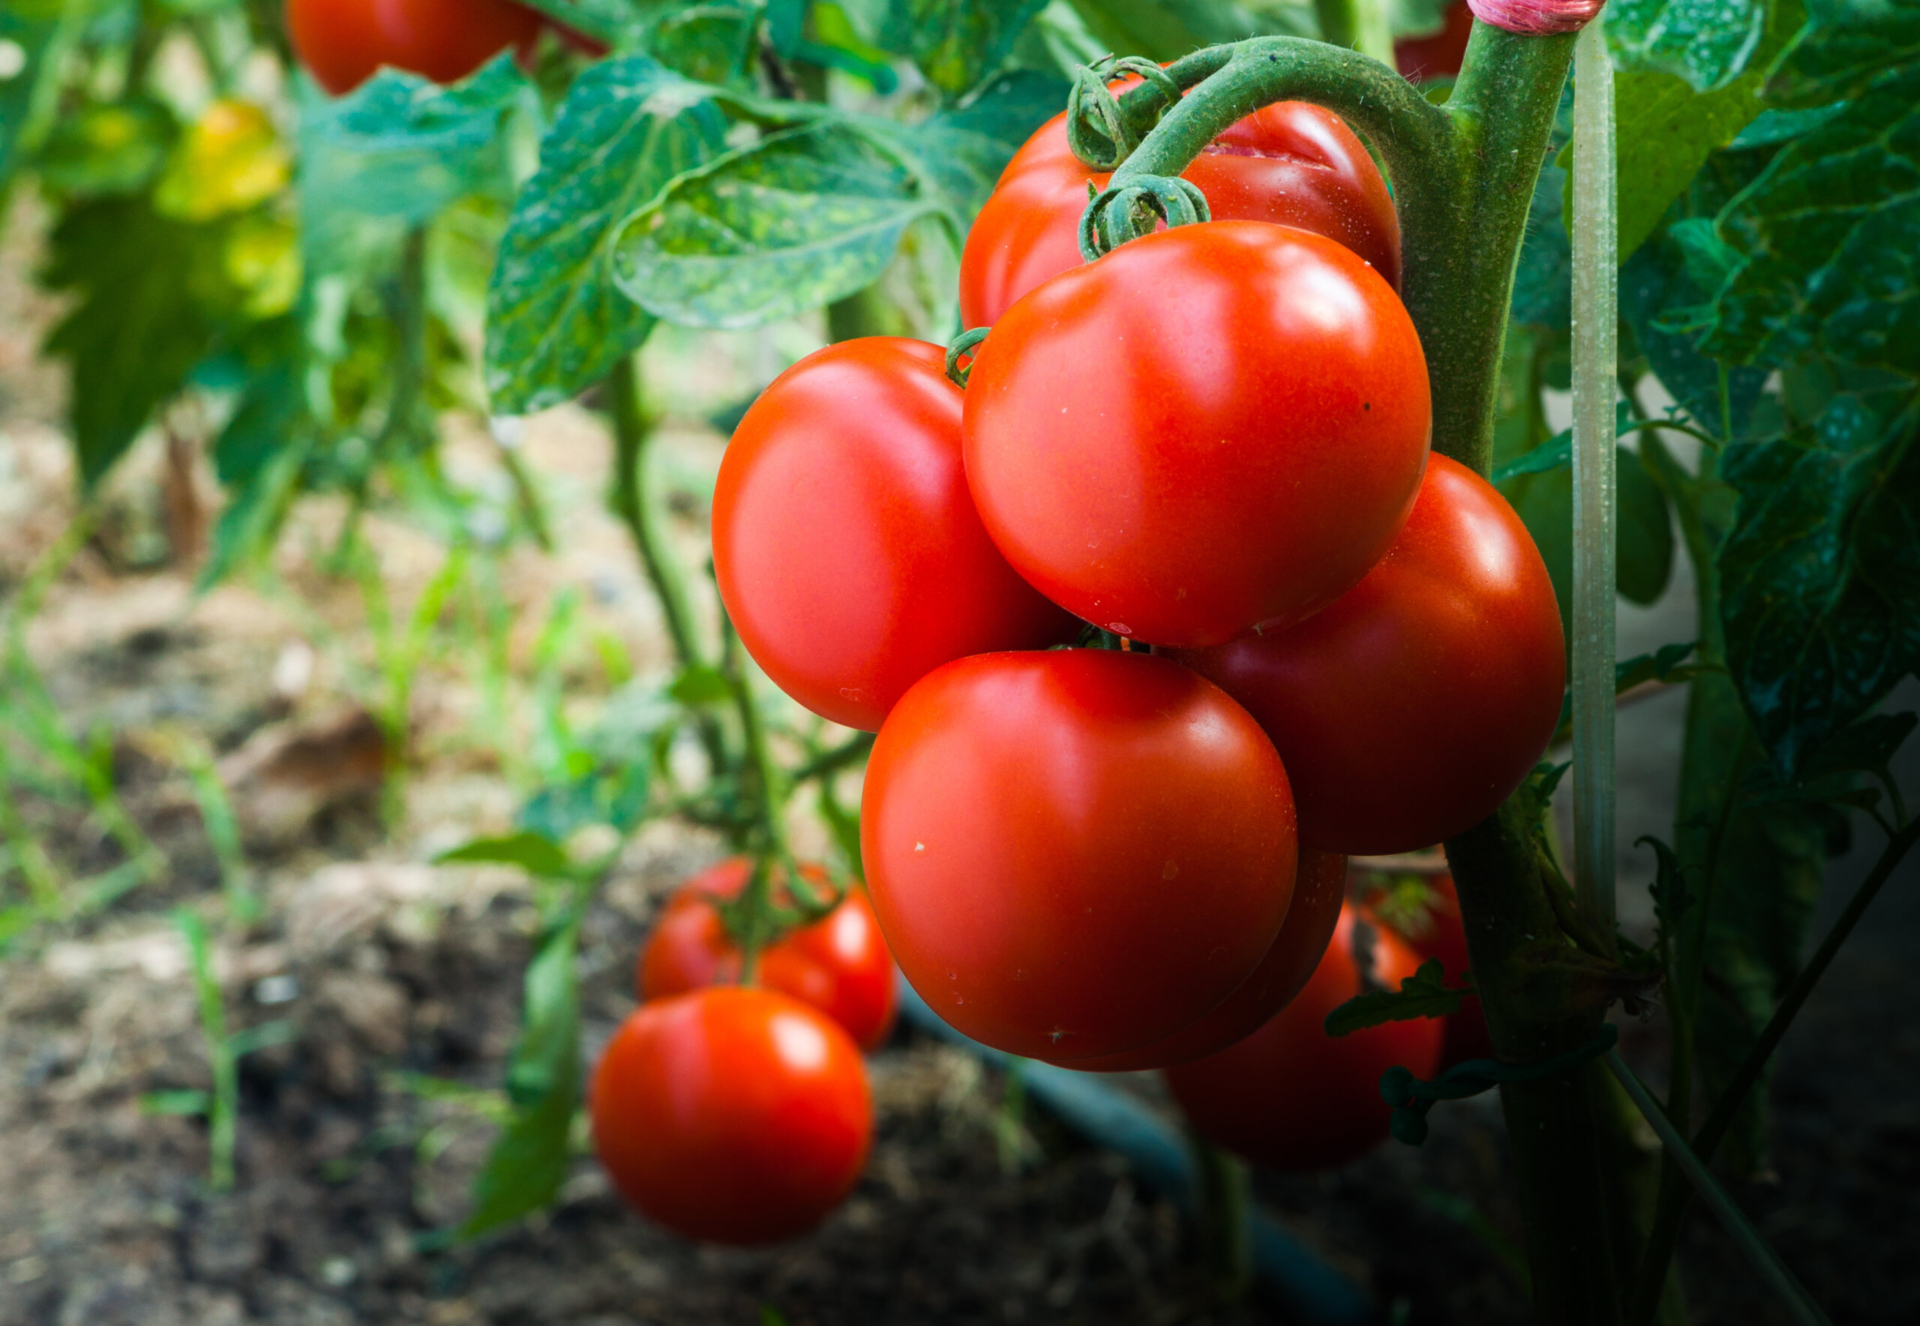 Ripe tomatoes on the vine in a garden